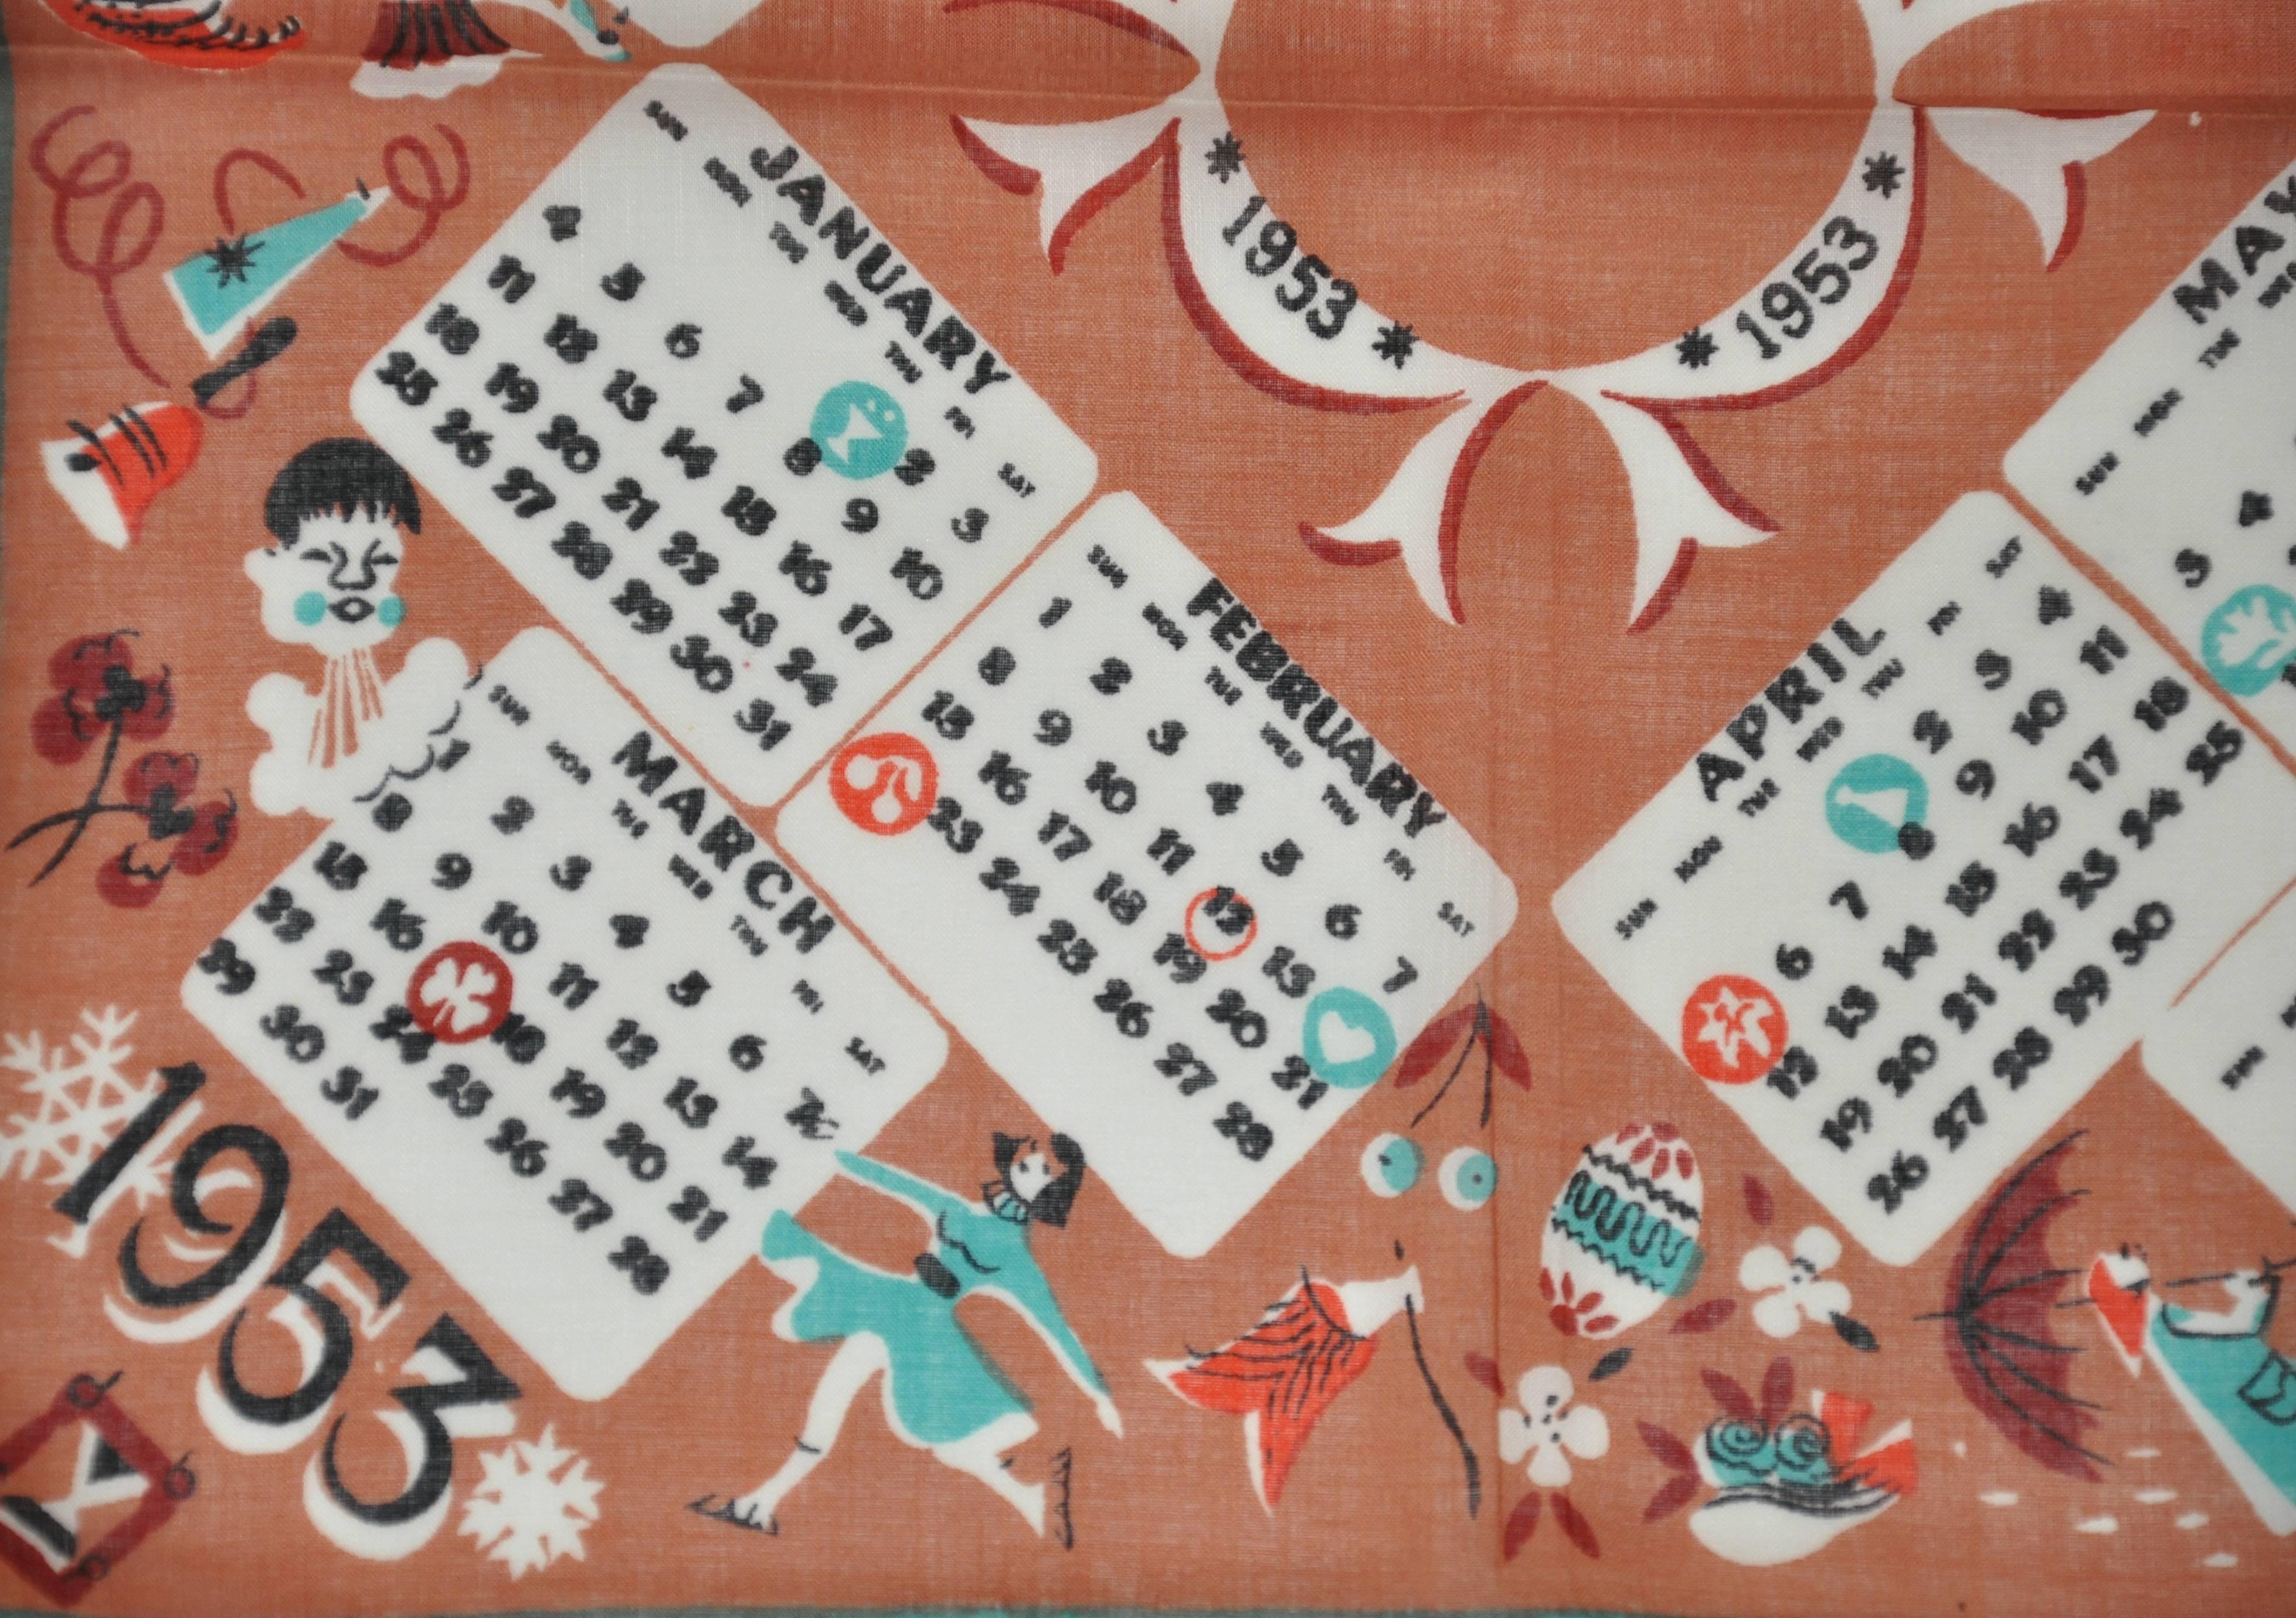 "1953" Calendar cotton handkerchief measures 14" x 14" and finished with green hand-rolled edges. Made in USA.